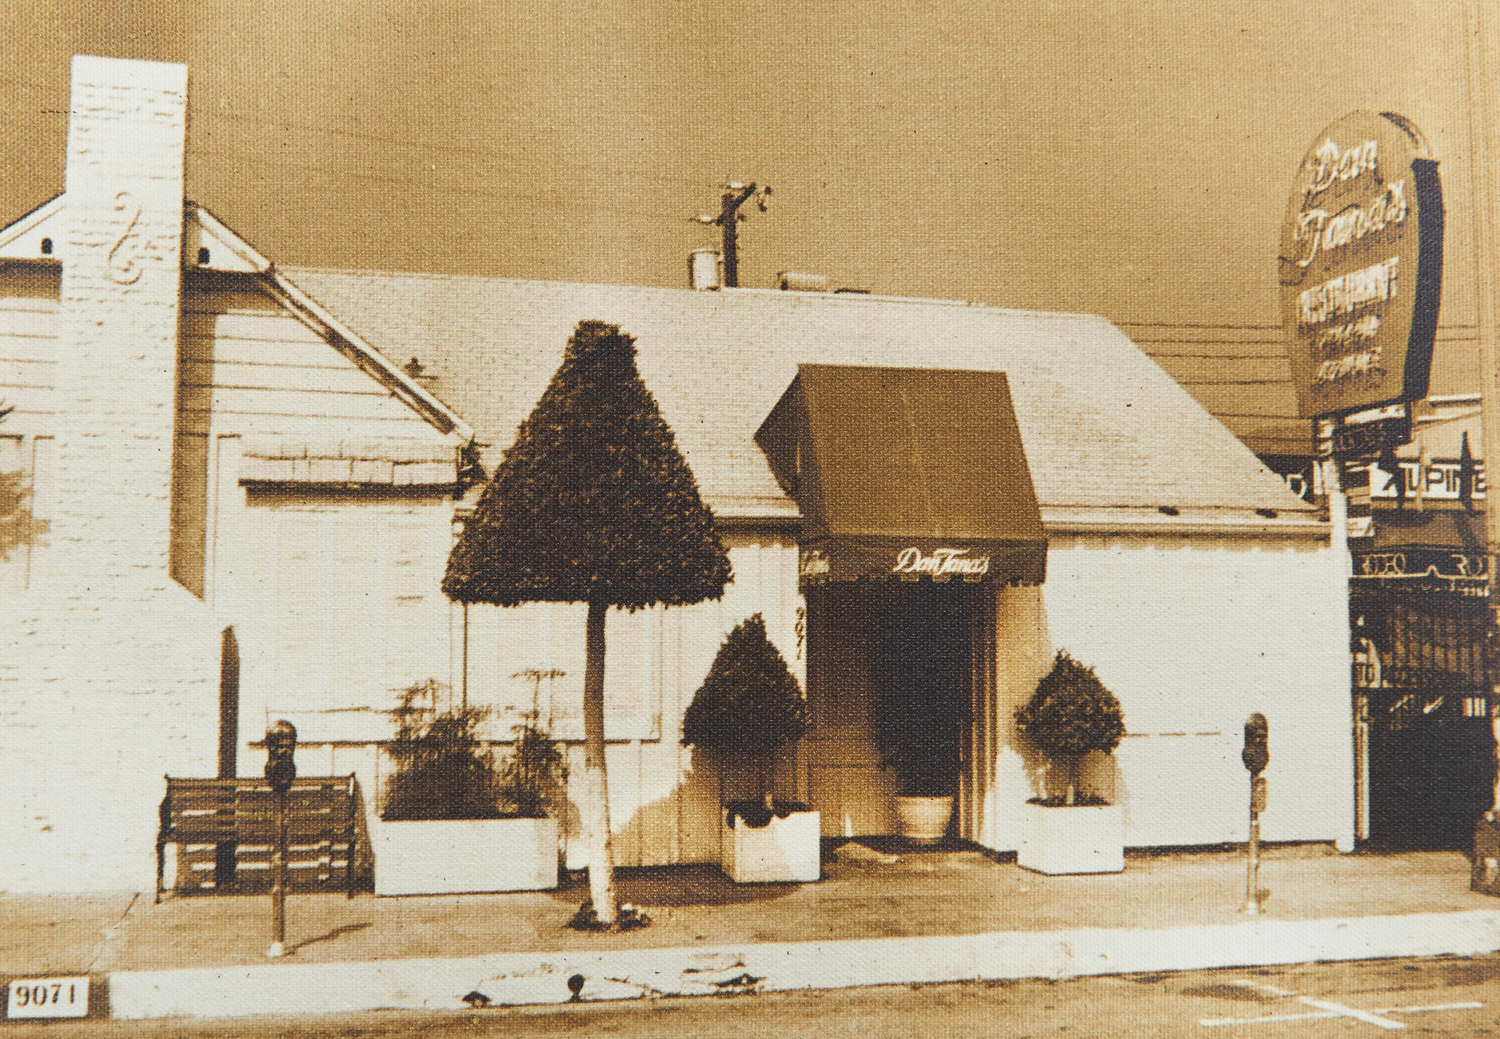 Vintage Tana's - The Restaurant in 1964